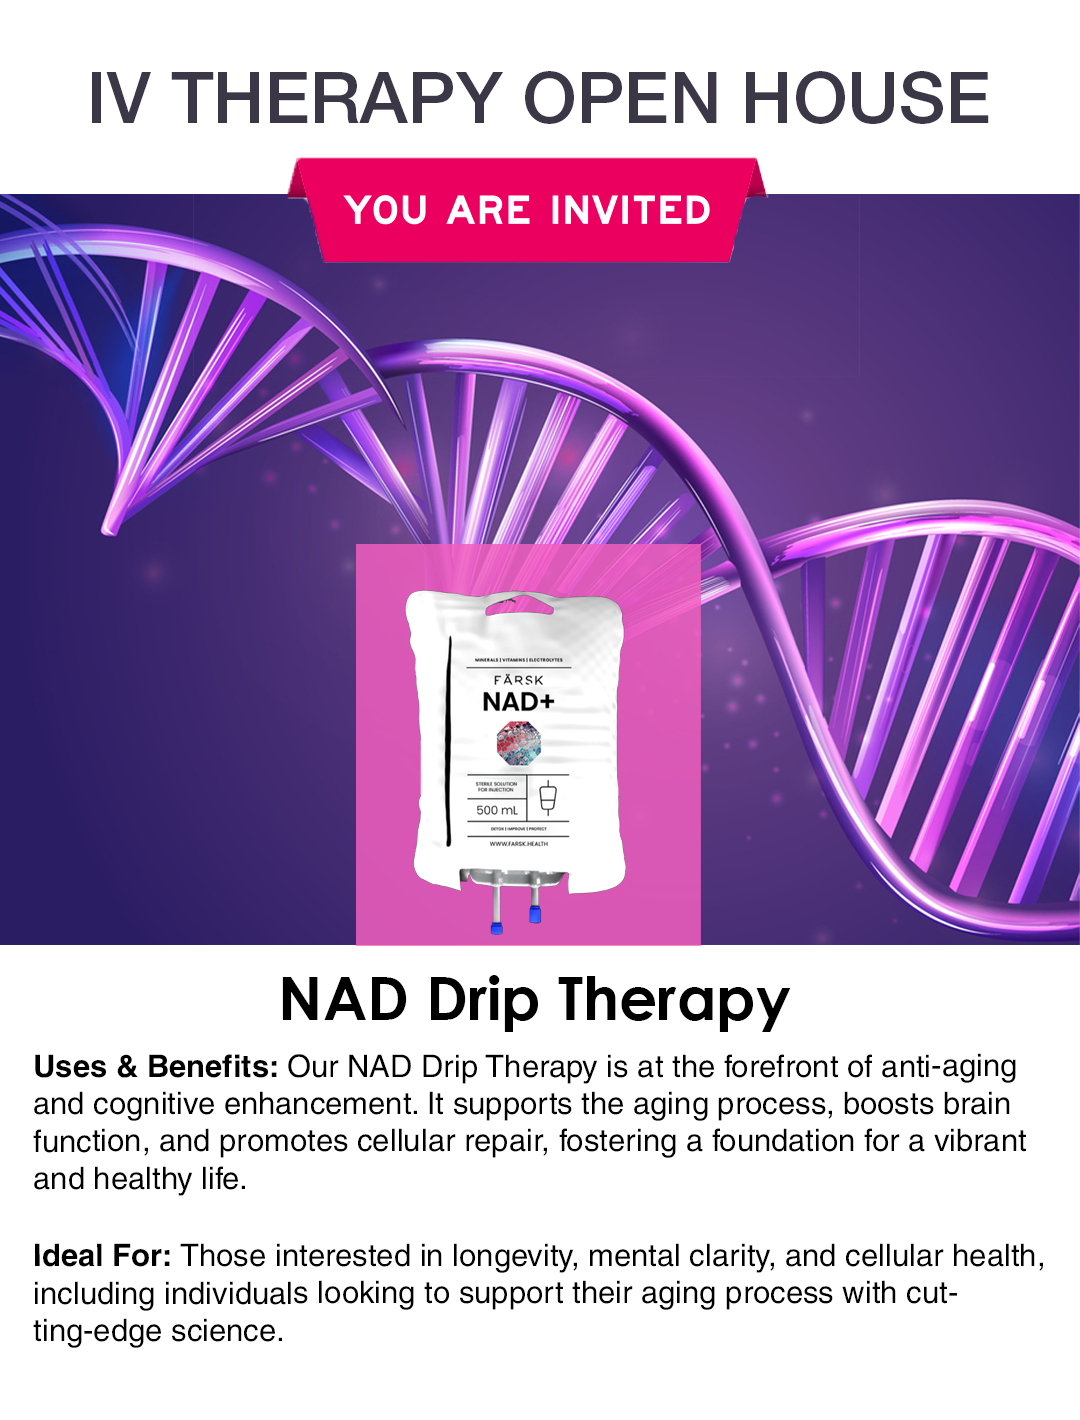 NAD Drip IV Therapy at The Lip Doctor for anti-aging and cognitive enhancement